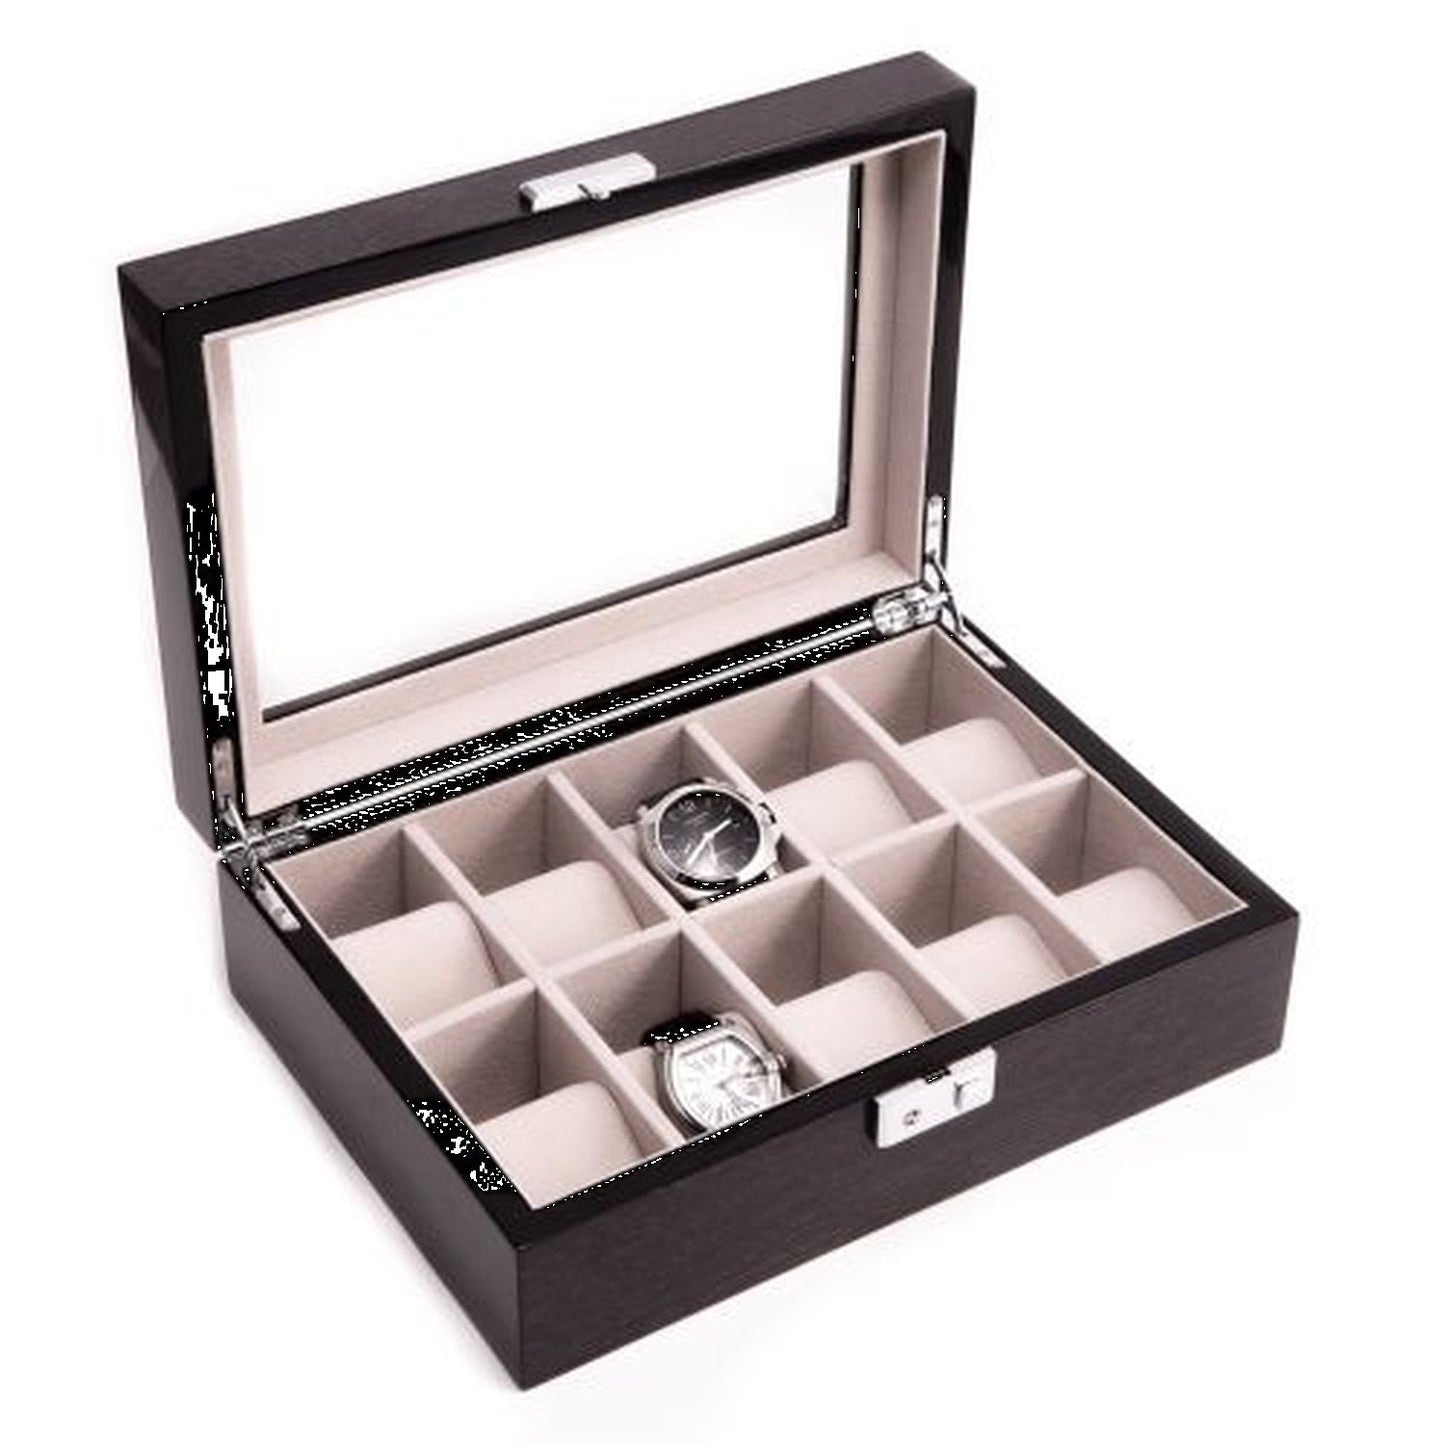 Lacquered "Steel Gray" Wood 10 Watch Case With Glass Top